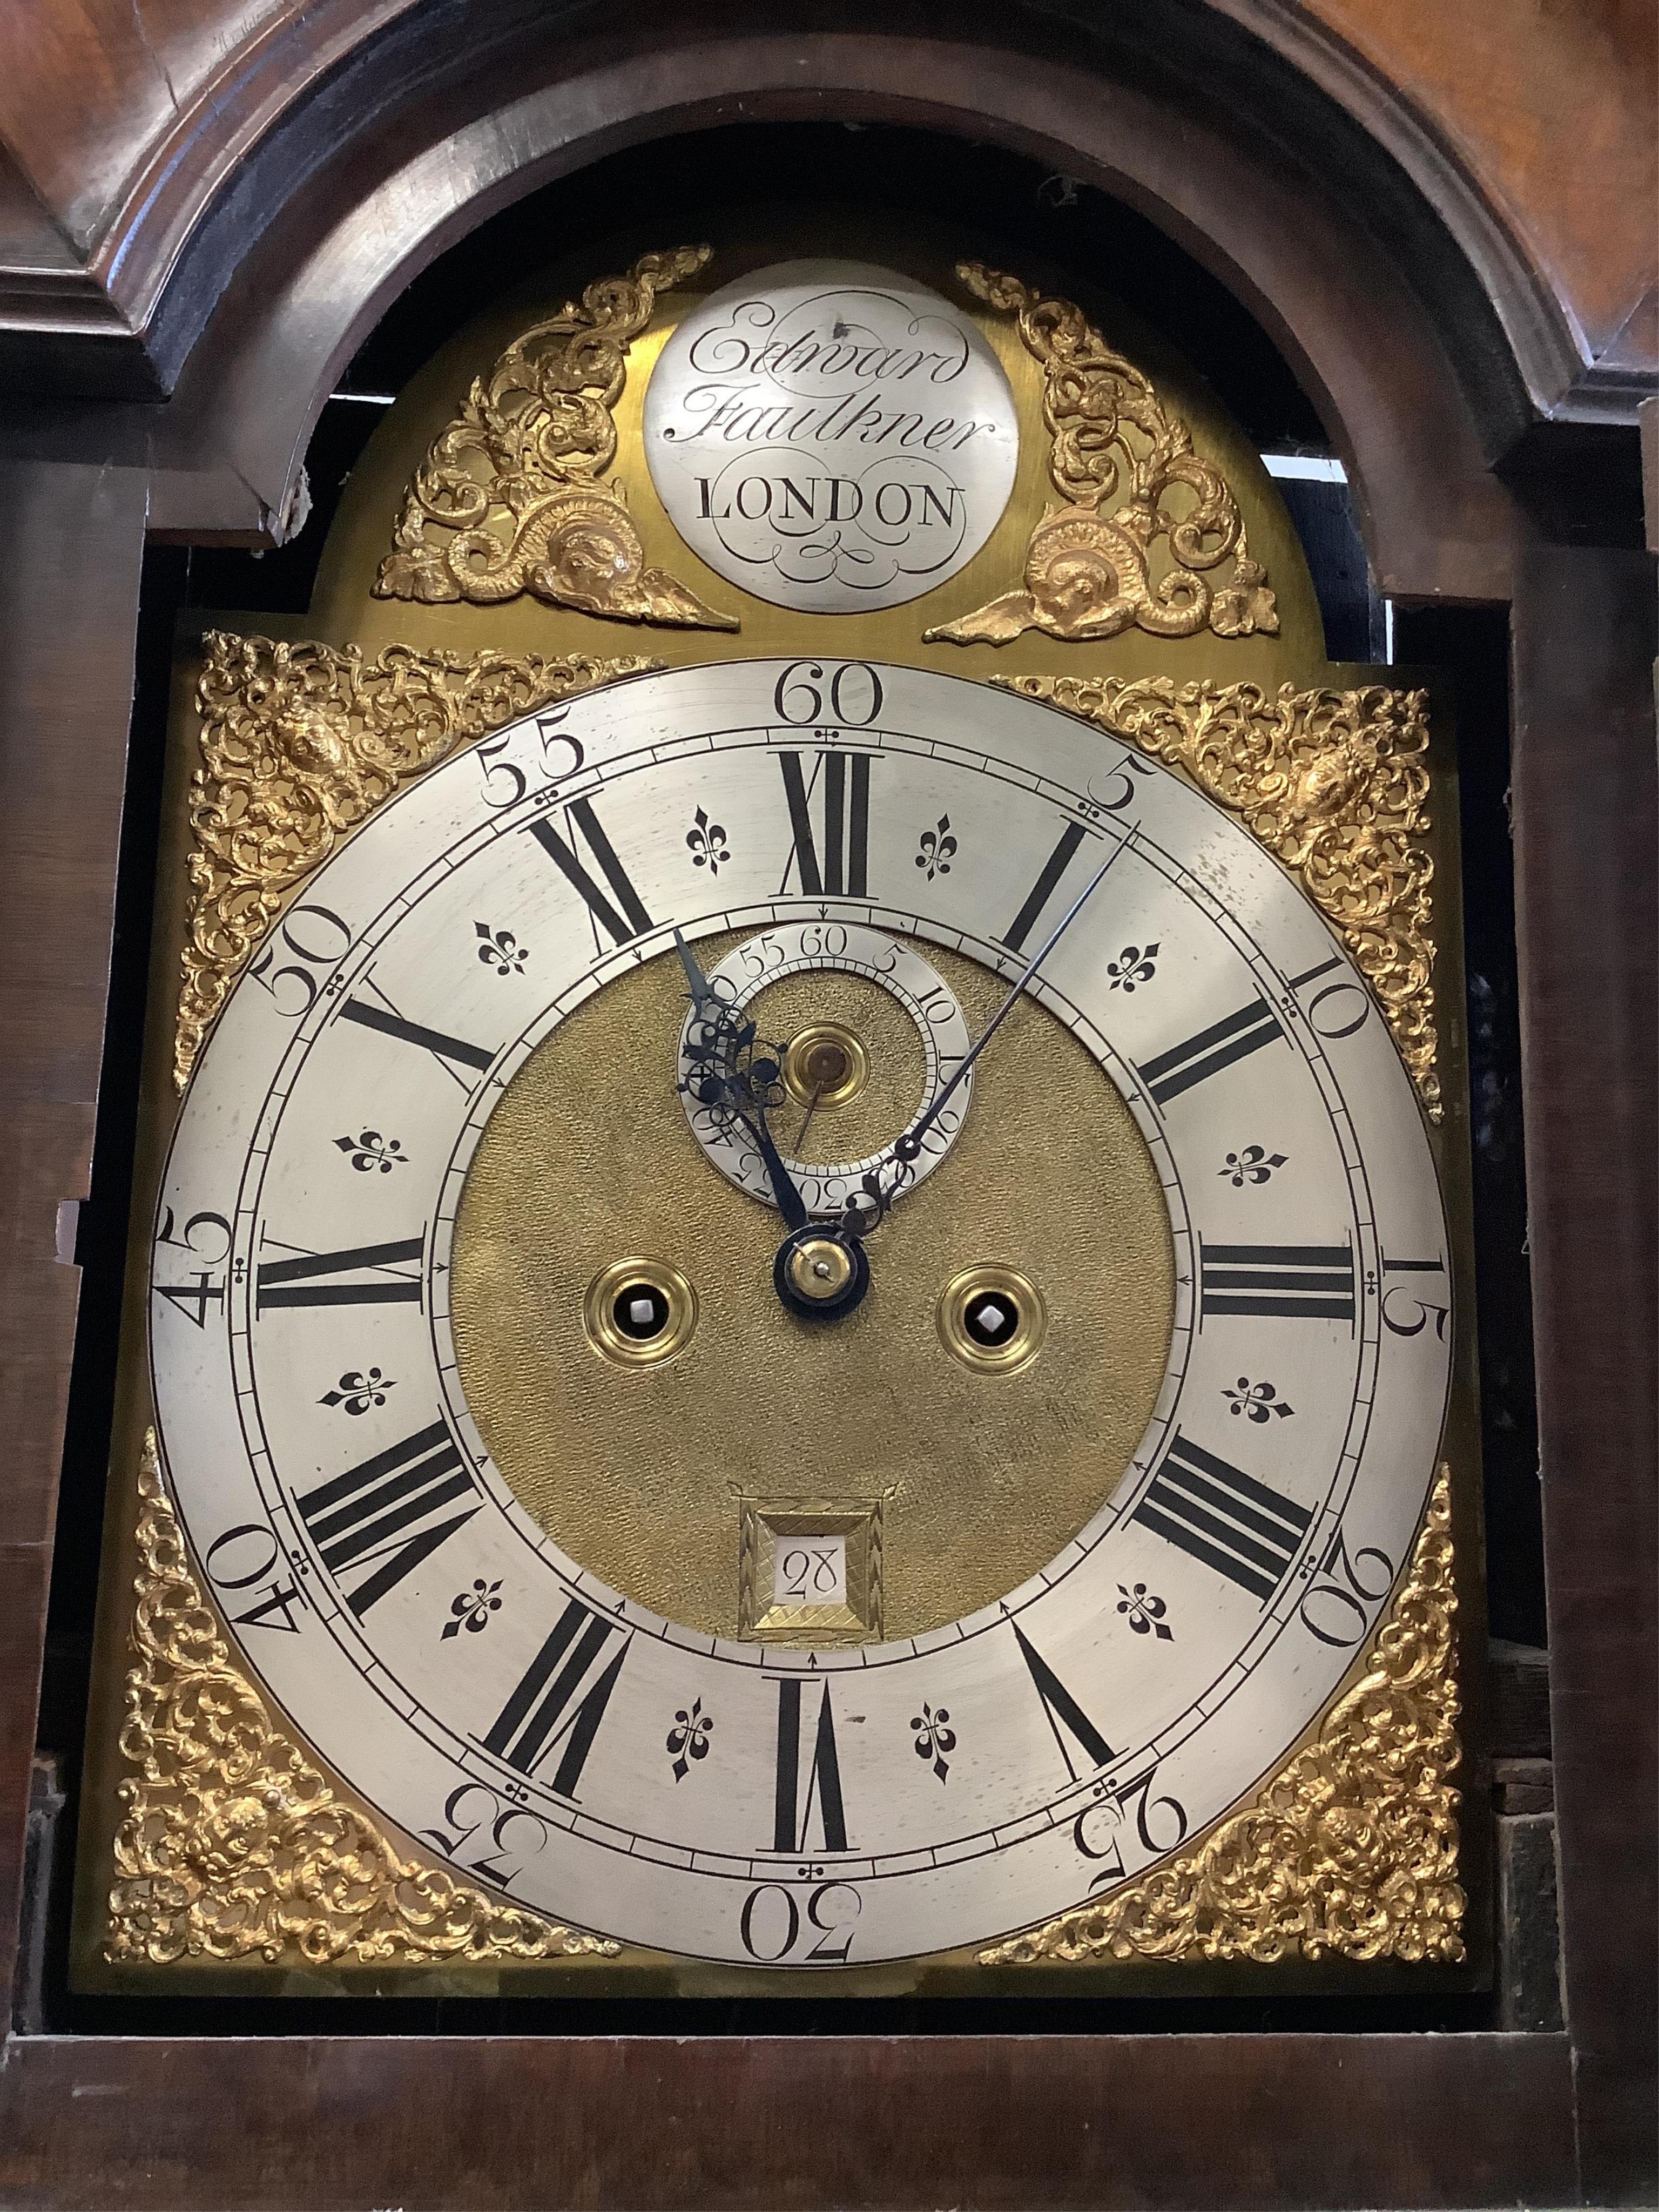 Edward Faulkner, London, a George III burr walnut cased eight day longcase clock, with an arched brass and silvered dial, height 213cm, Plinth reduced. Condition - poor